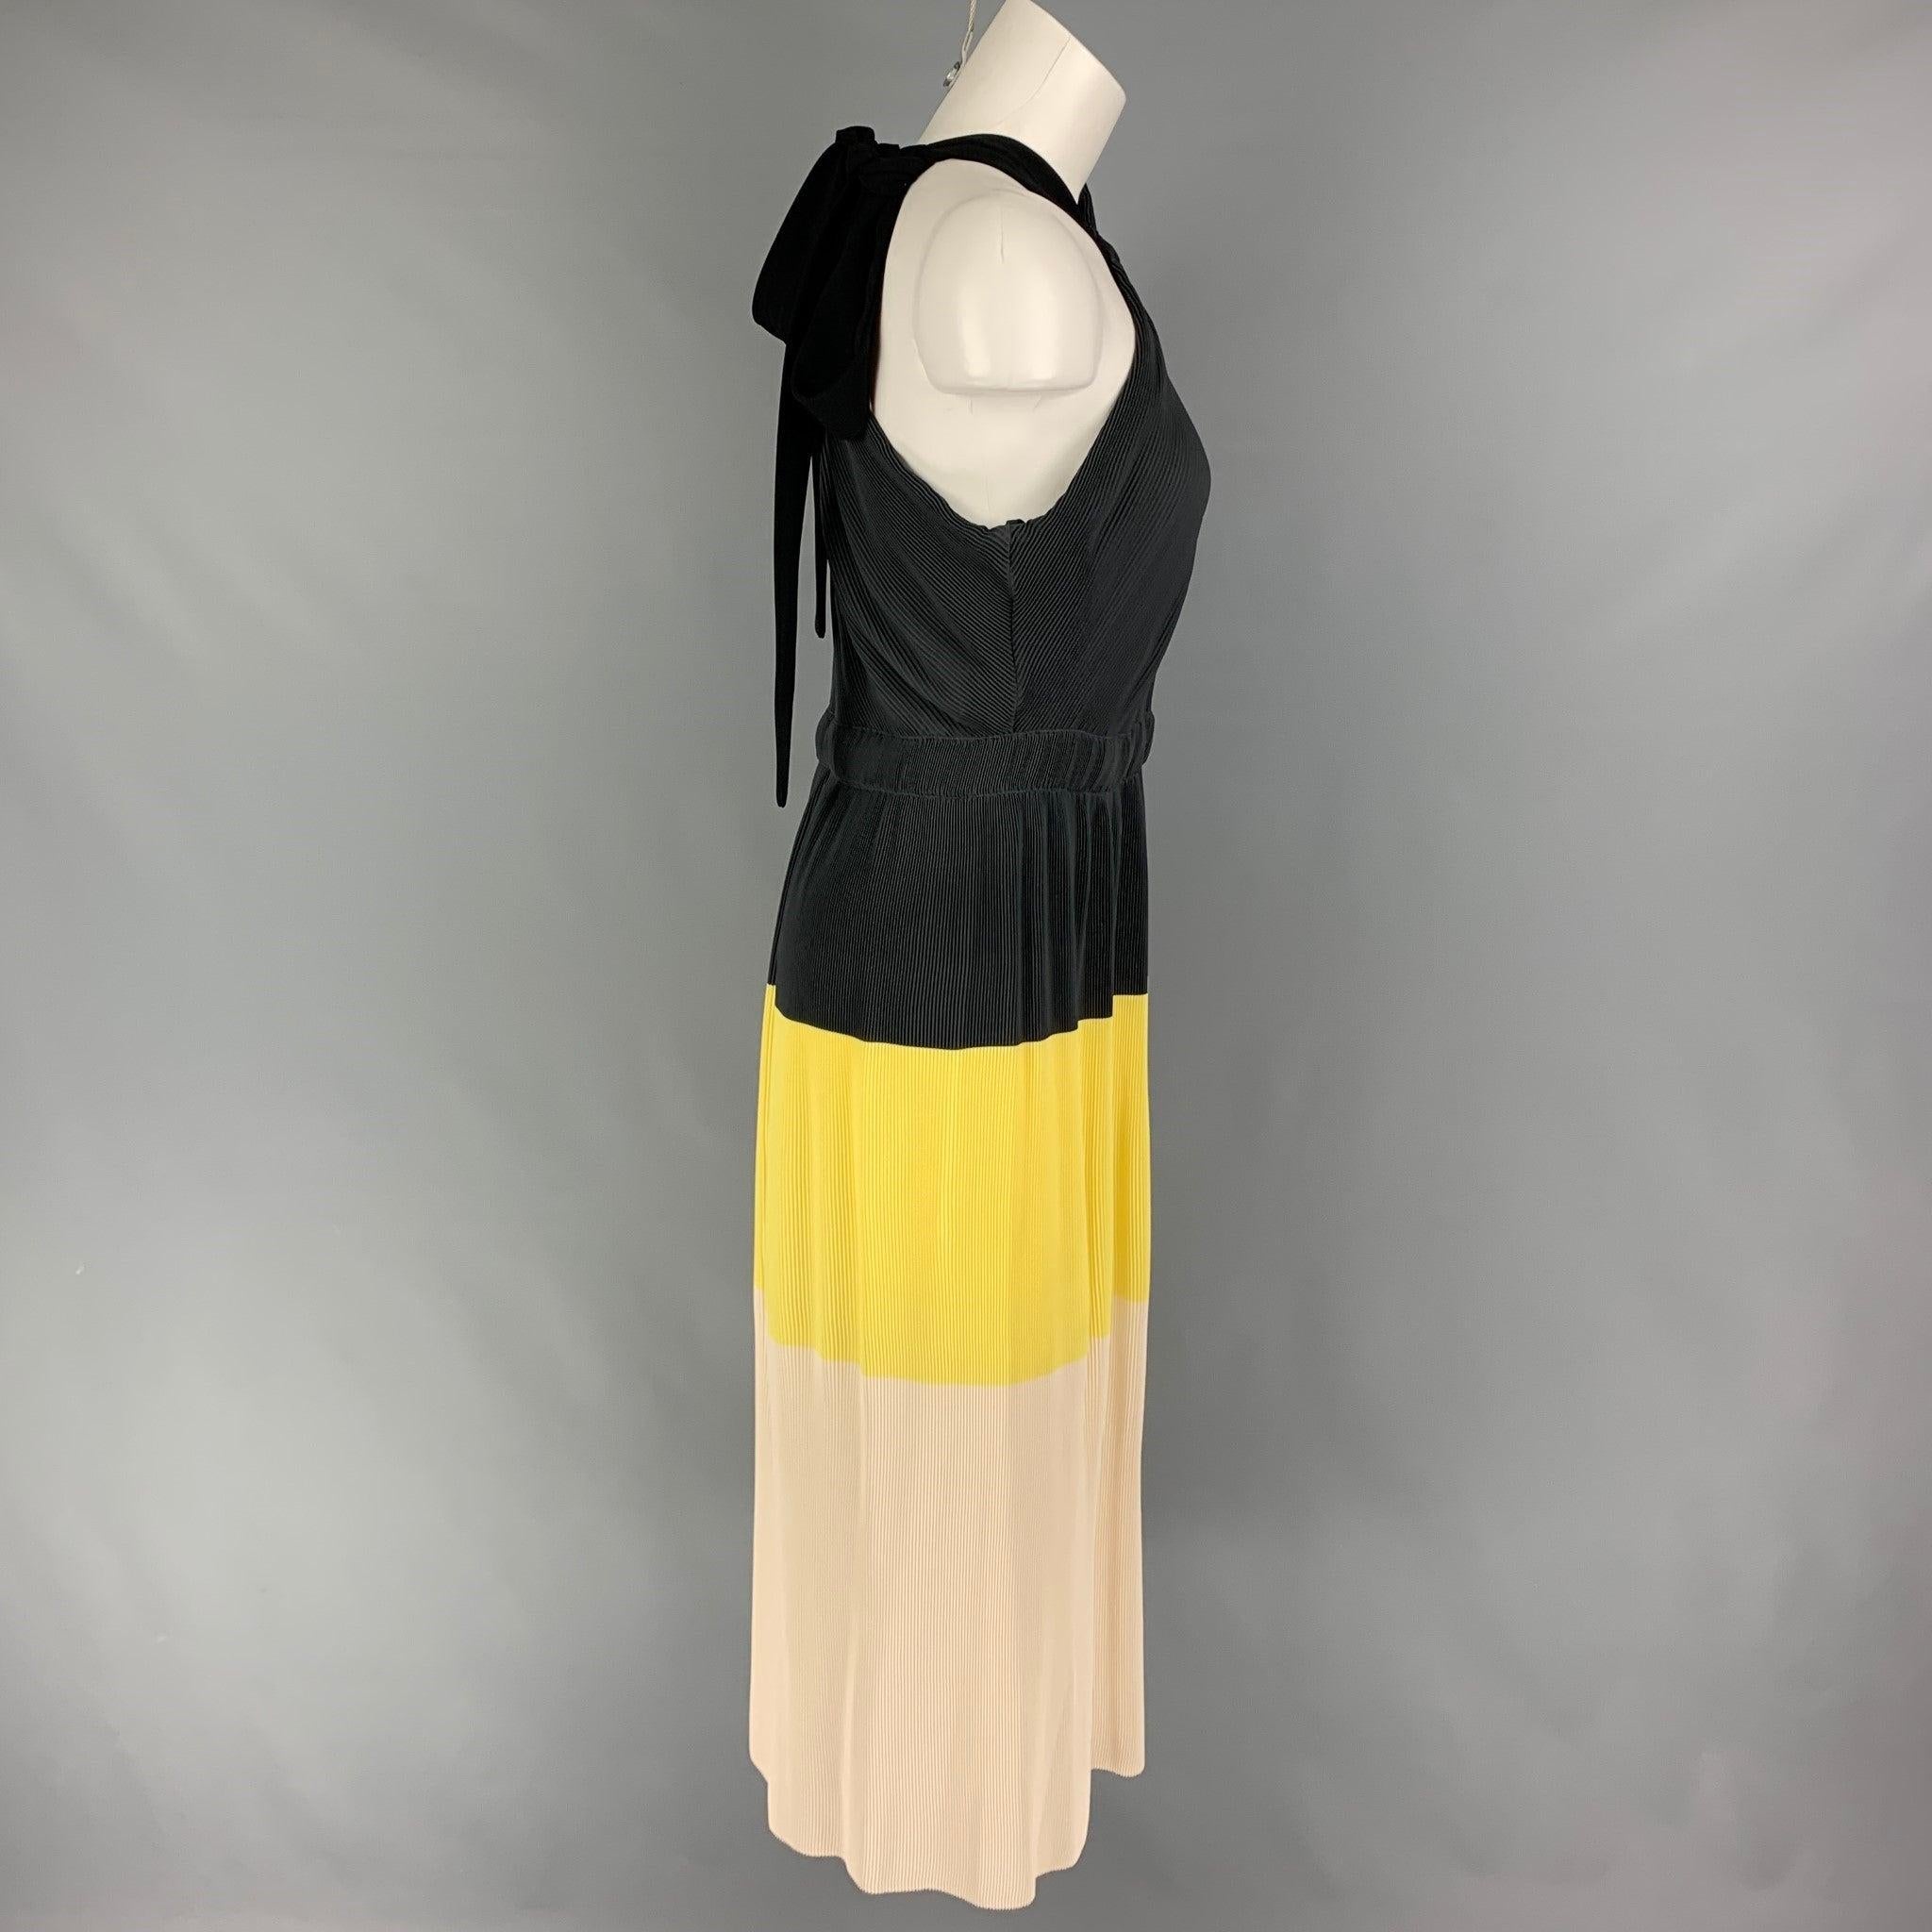 DEREK LAM dress comes in a multi-color pleated polyester featuring a one shoulder style, elastic waist, self-tie shoulder detail, and a side zipper closure.
Very Good
Pre-Owned Condition. 

Marked:   8 

Measurements: 
  Bust:
32 inches  Waist: 28